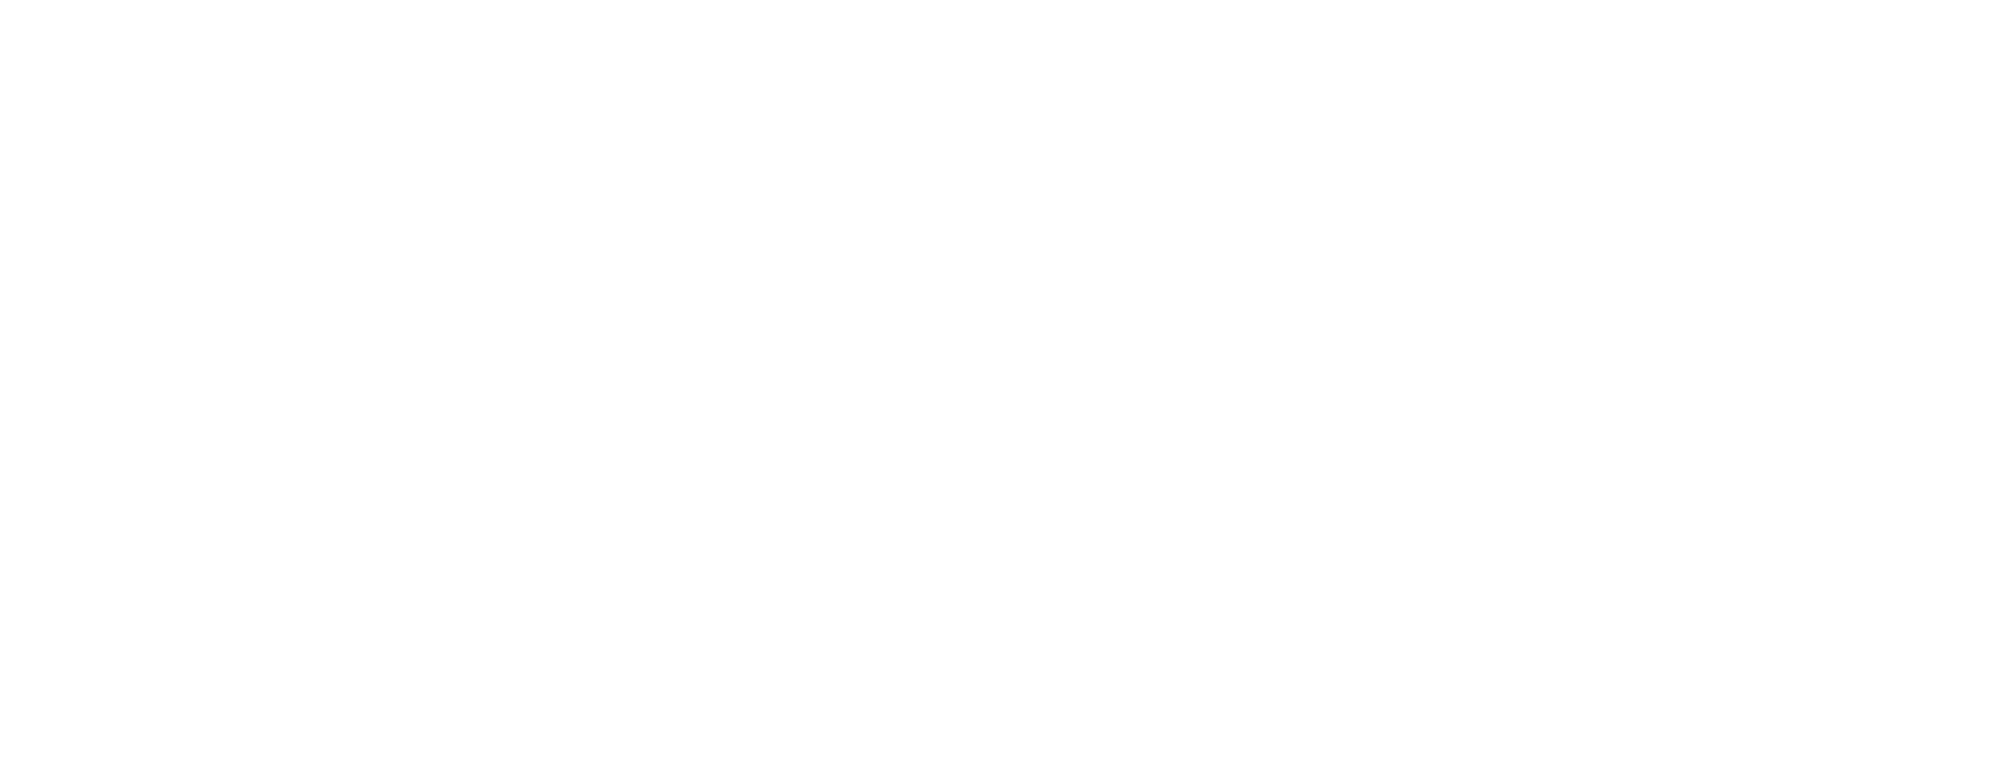 OpenFF Toolkit 0.11.4+0.g516048f4.dirty documentation logo